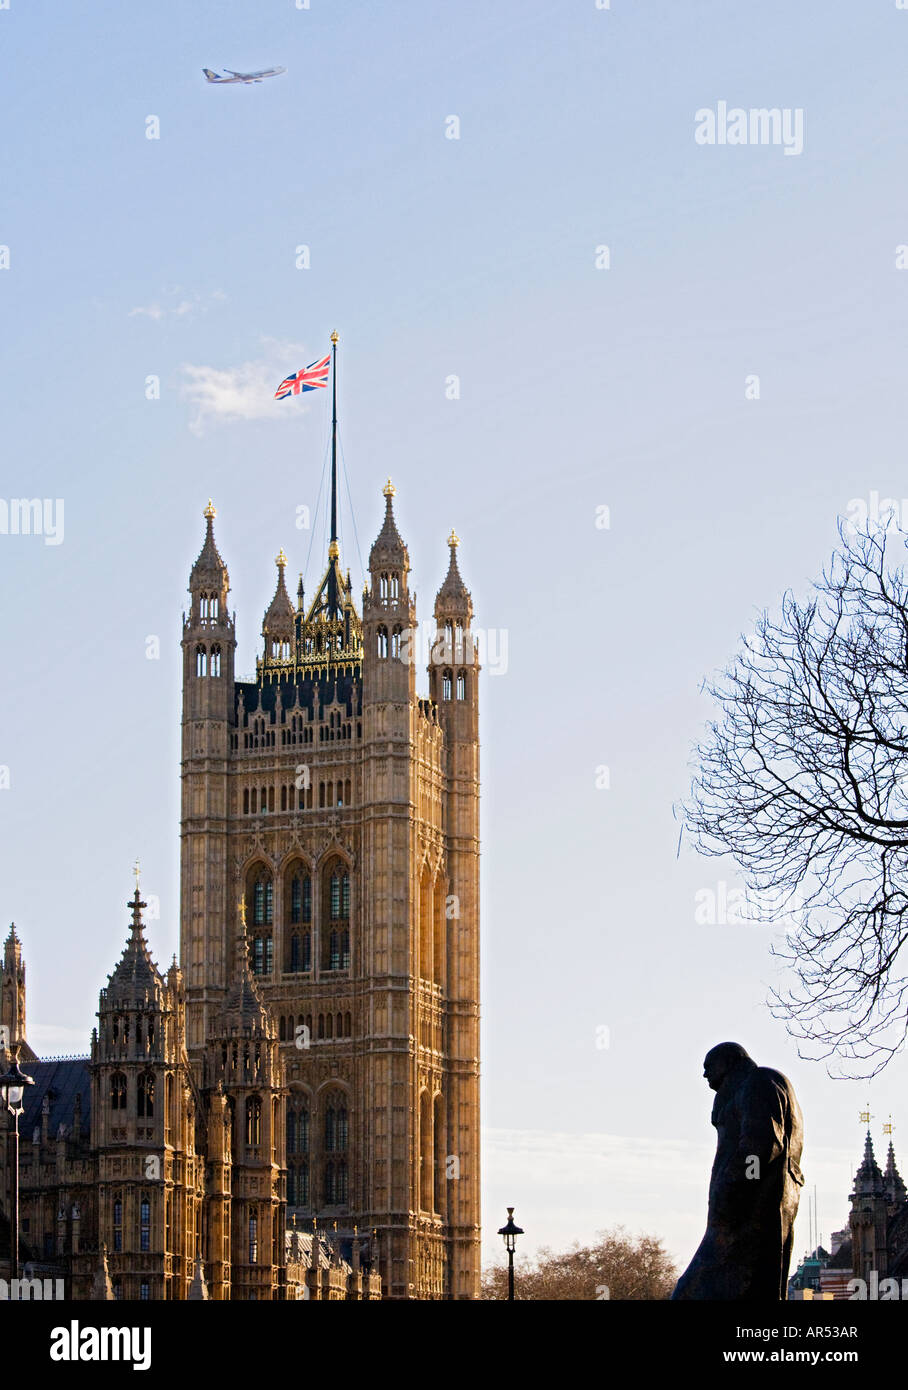 Victoria Tower im House of Parlament, Palace of Westminster, London, England, Vereinigtes Königreich Stockfoto